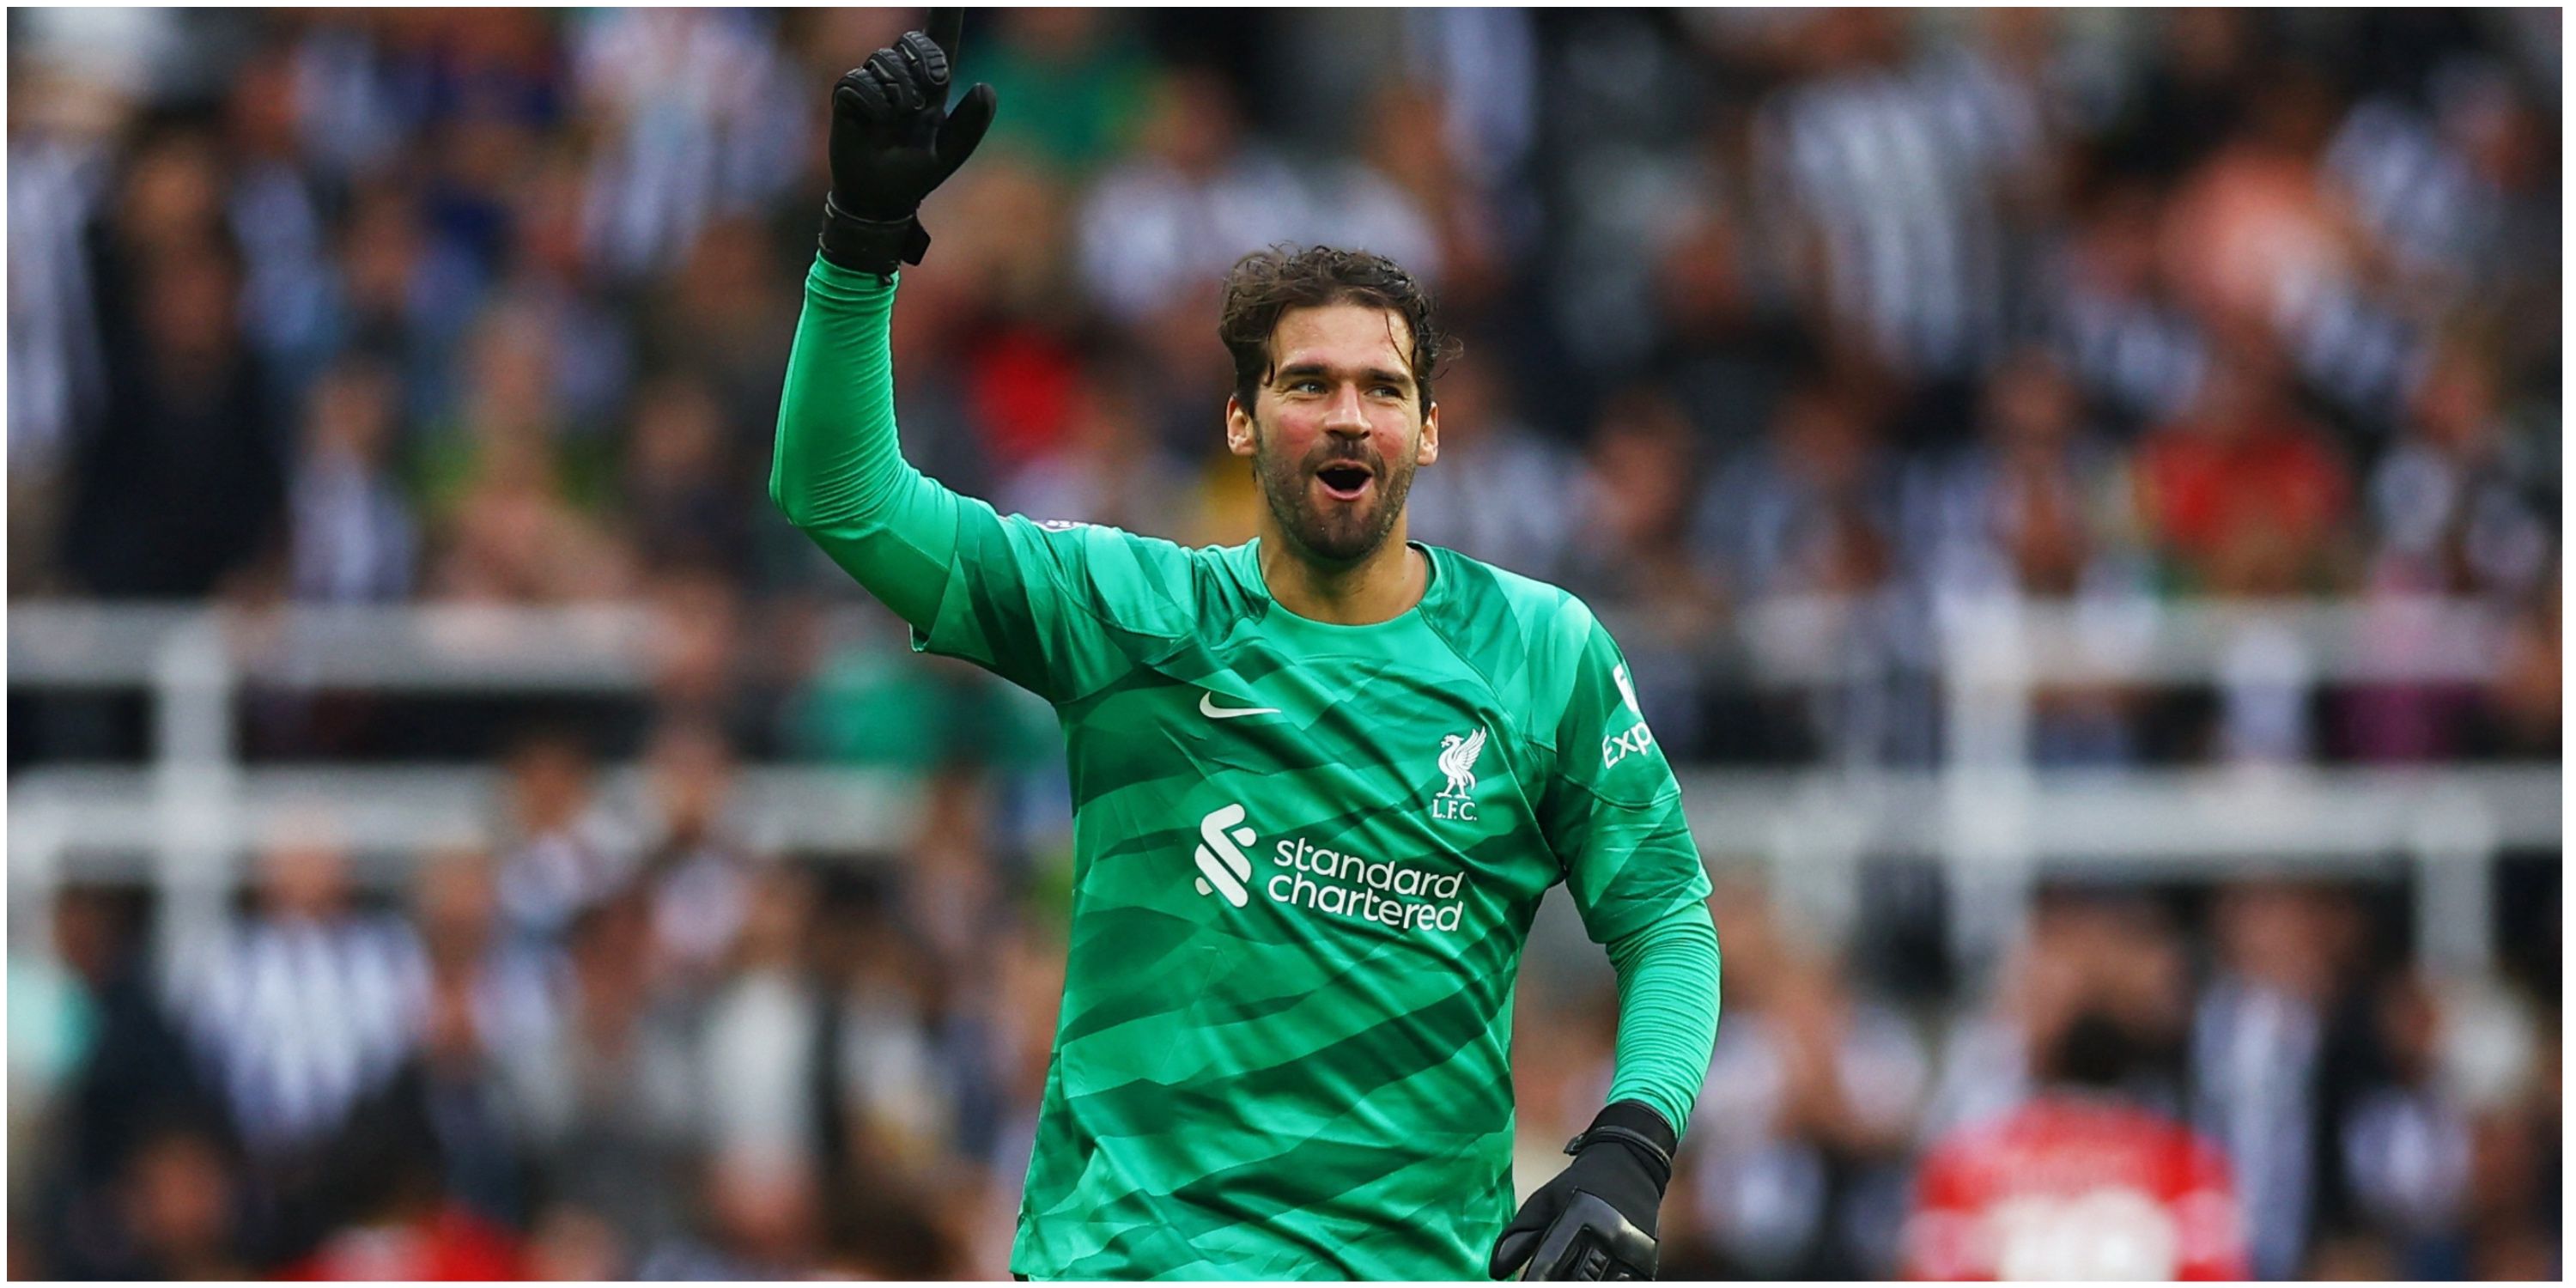 Alisson’s miracle save for Liverpool described as ‘best I’ve ever seen’ by Newcastle’s Eddie Howe